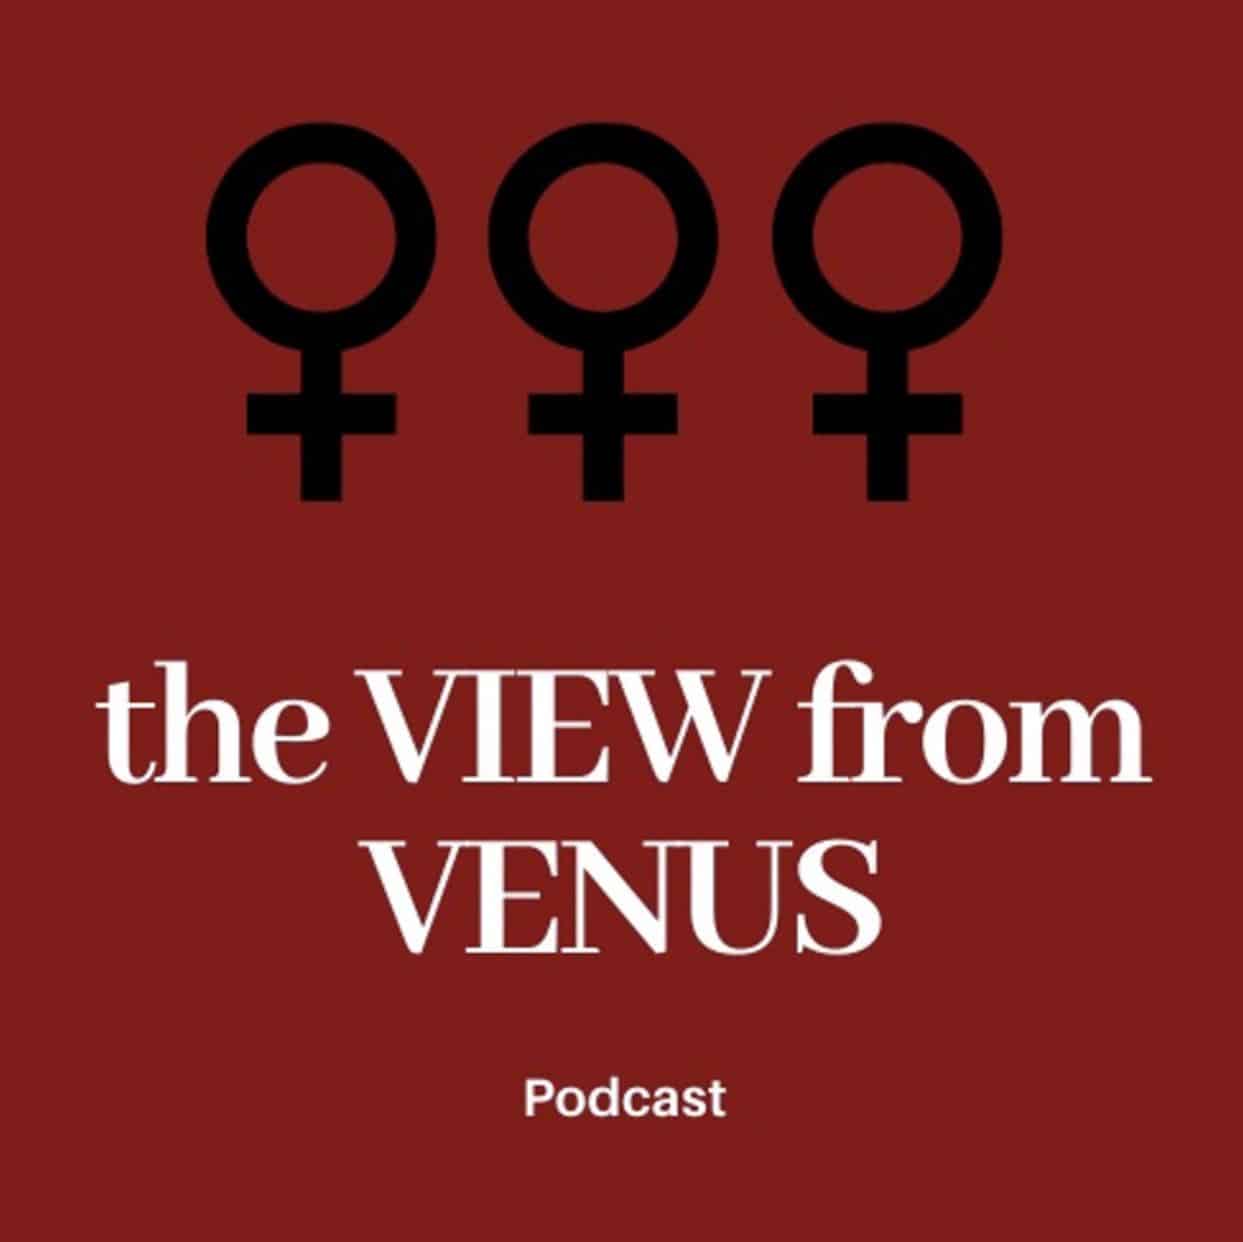 The View from Venus Podcast